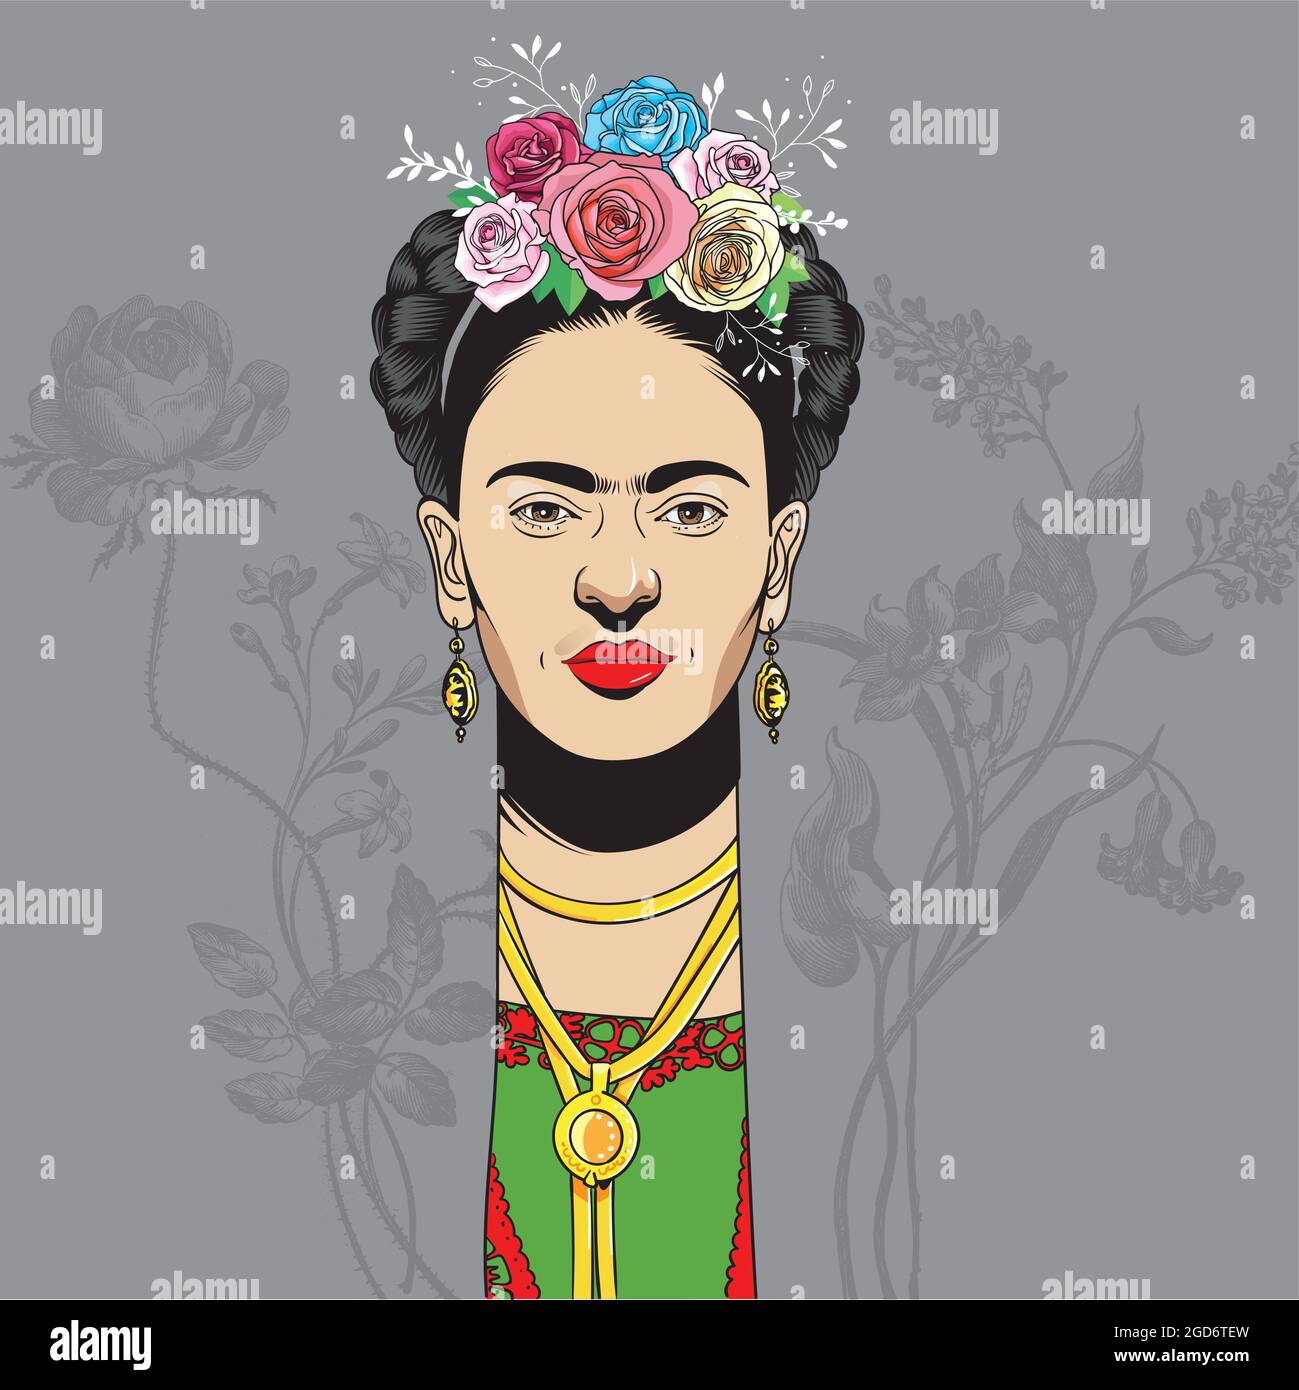 Frida Kahlo cartoon style portrait, She was a Mexican painter known for her many portraits, self-portraits, and works inspired by the nature and artif Stock Vector